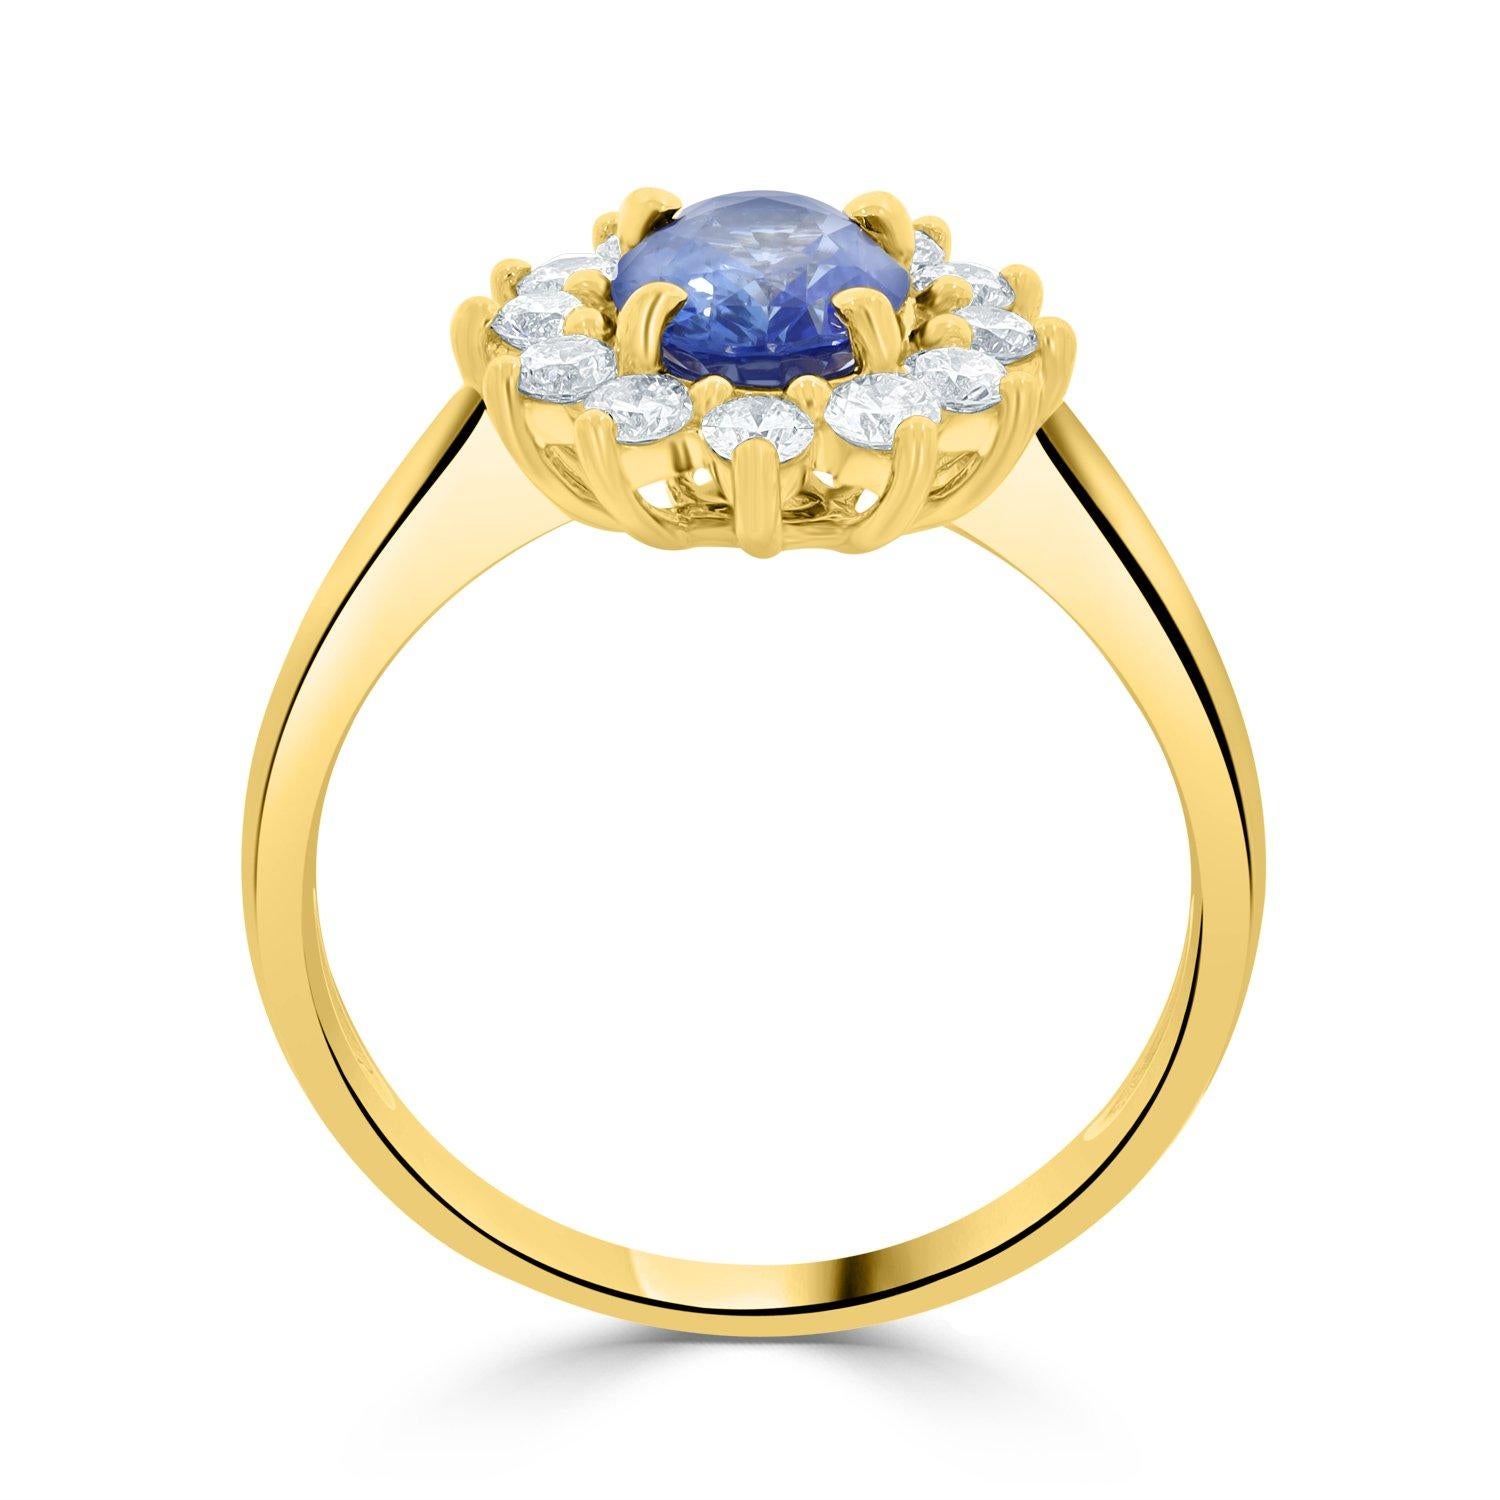 Designed with shiny 18K yellow gold, this marvelous ring is set with a gorgeous oval cut Sapphire. Highlighting this brilliant gemstone are dazzling round cut Diamonds.

This ring is created in a sunburst design, a classic Hollywood style which